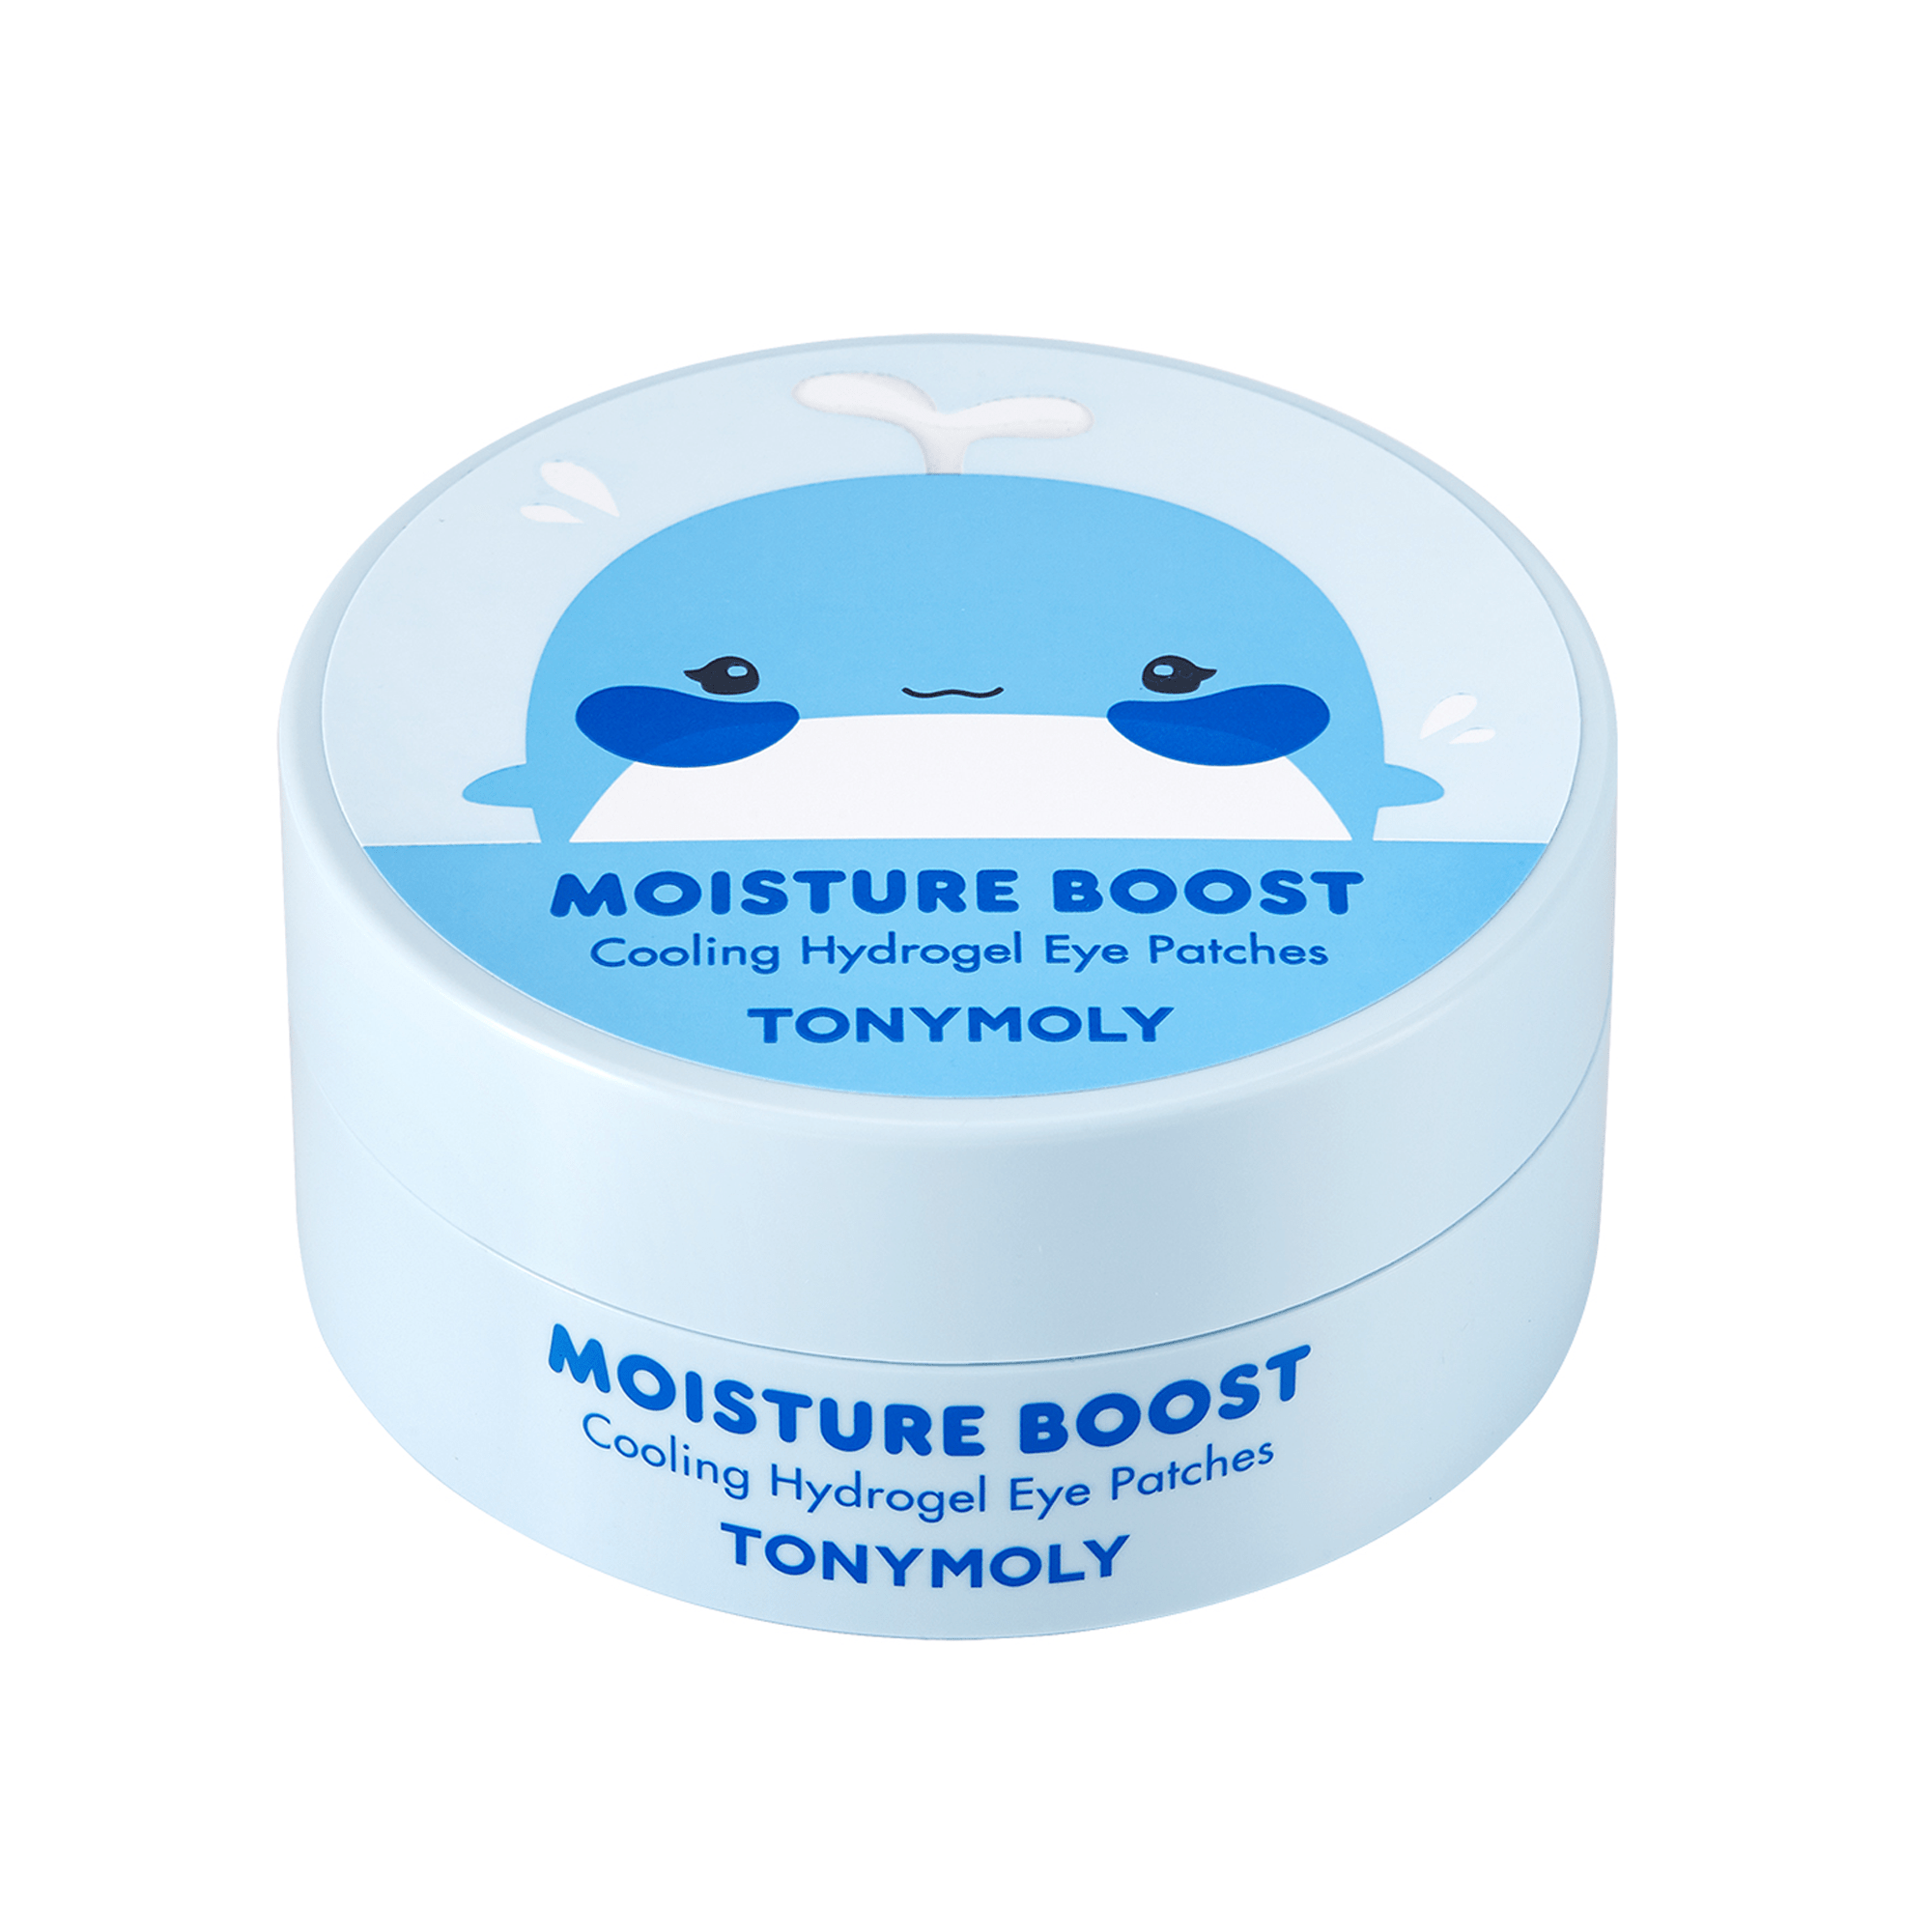 TONYMOLY Moisture Boost Cooling Hydrogel Eye Patches Kawaii Gifts 8806194042428